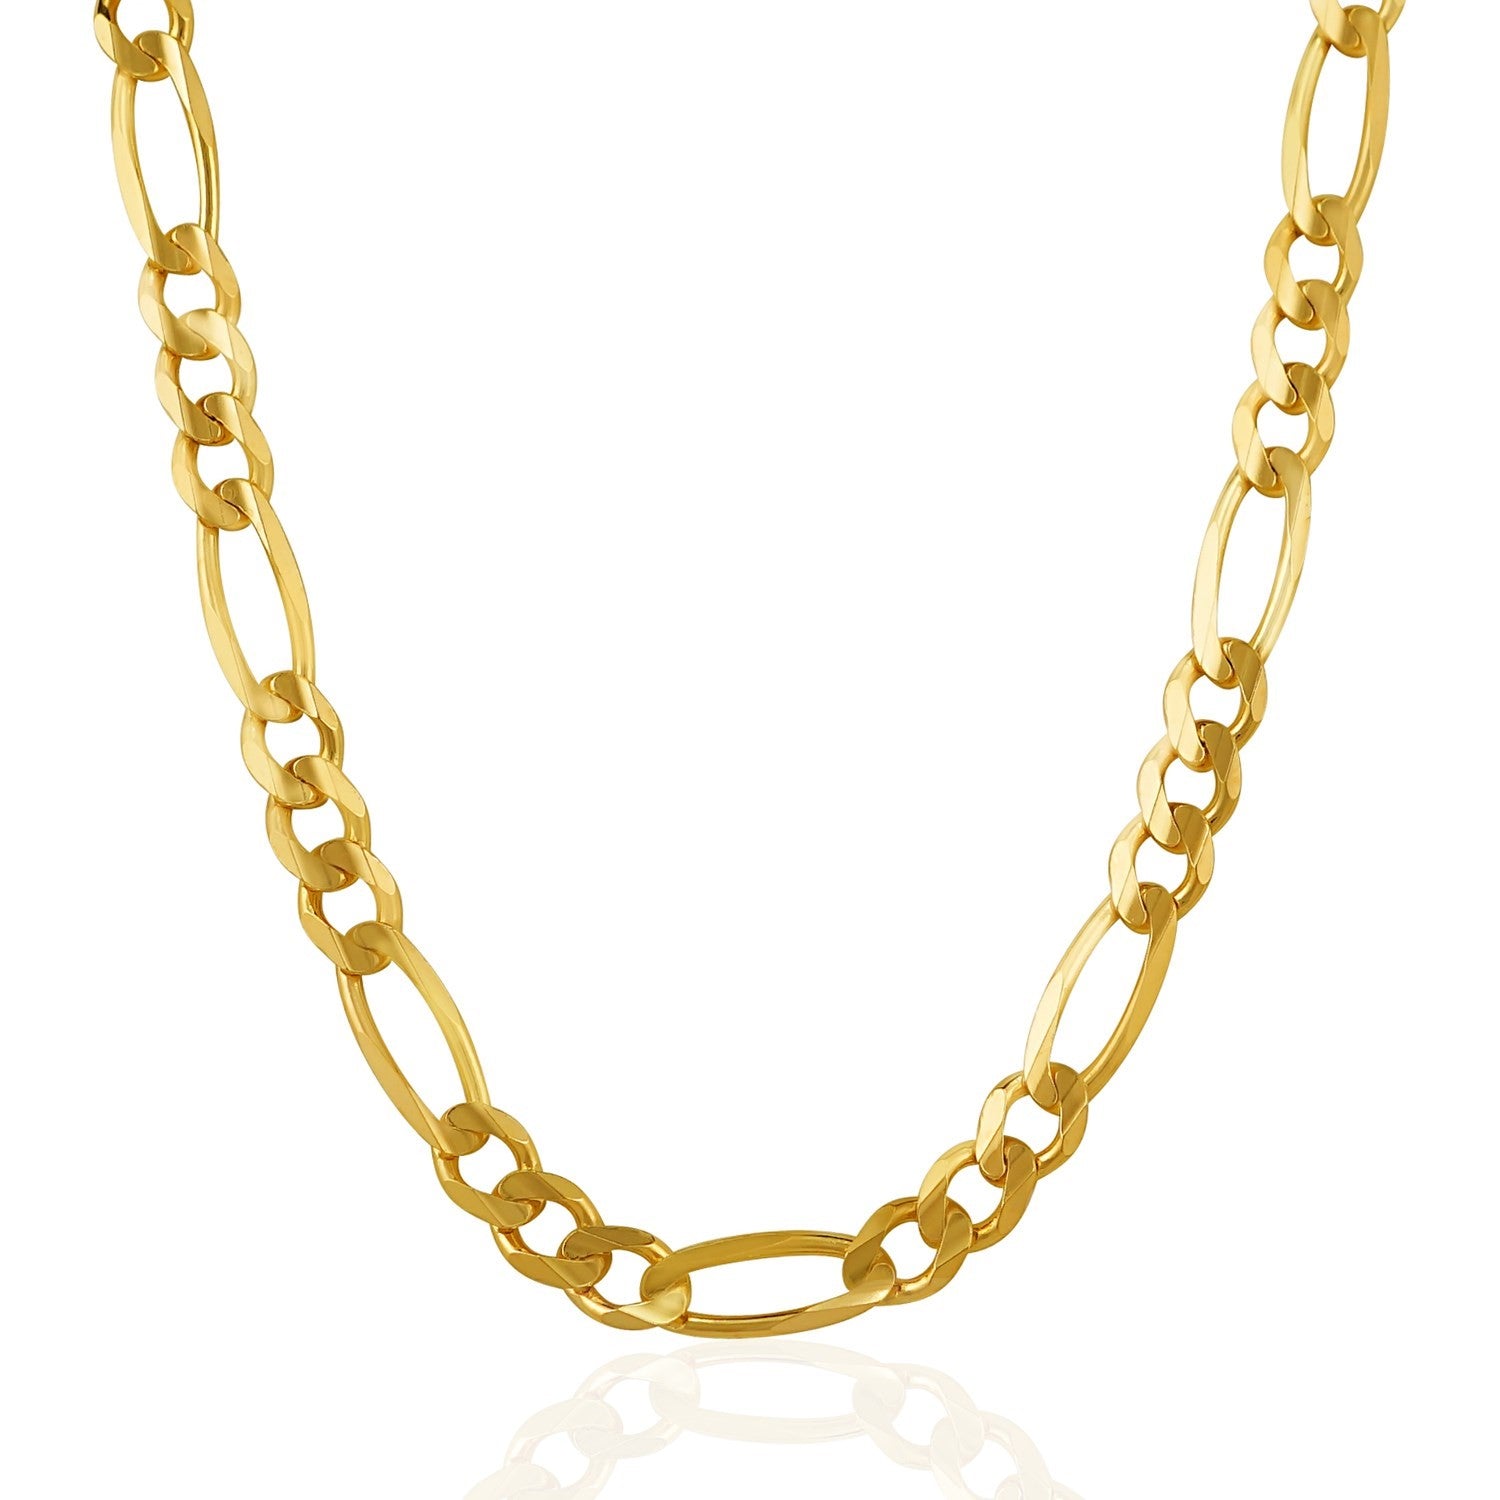 10K Yellow Gold Solid Figaro Chain 6 60 Mm 26366-2